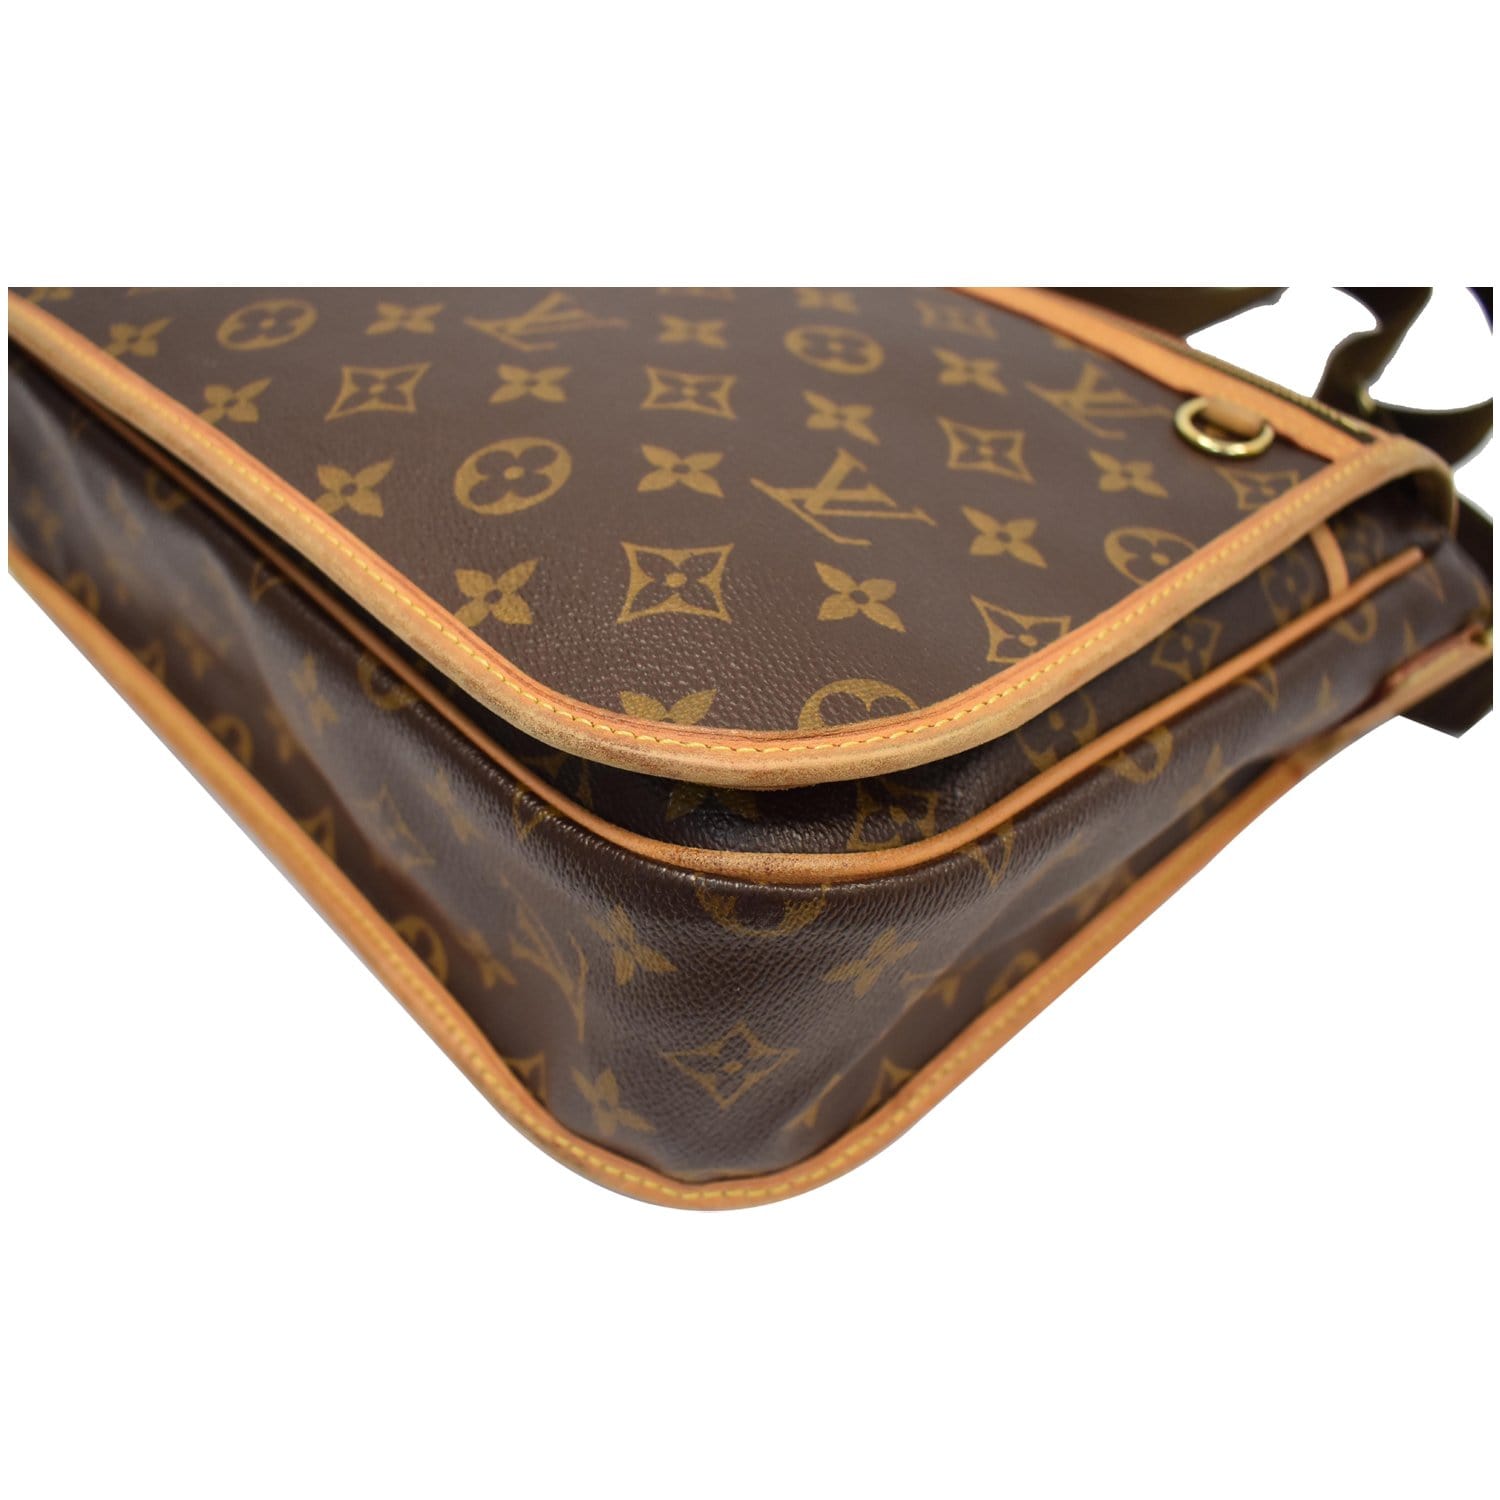 Louis Vuitton - Authenticated Bosphore Handbag - Synthetic Brown for Women, Very Good Condition